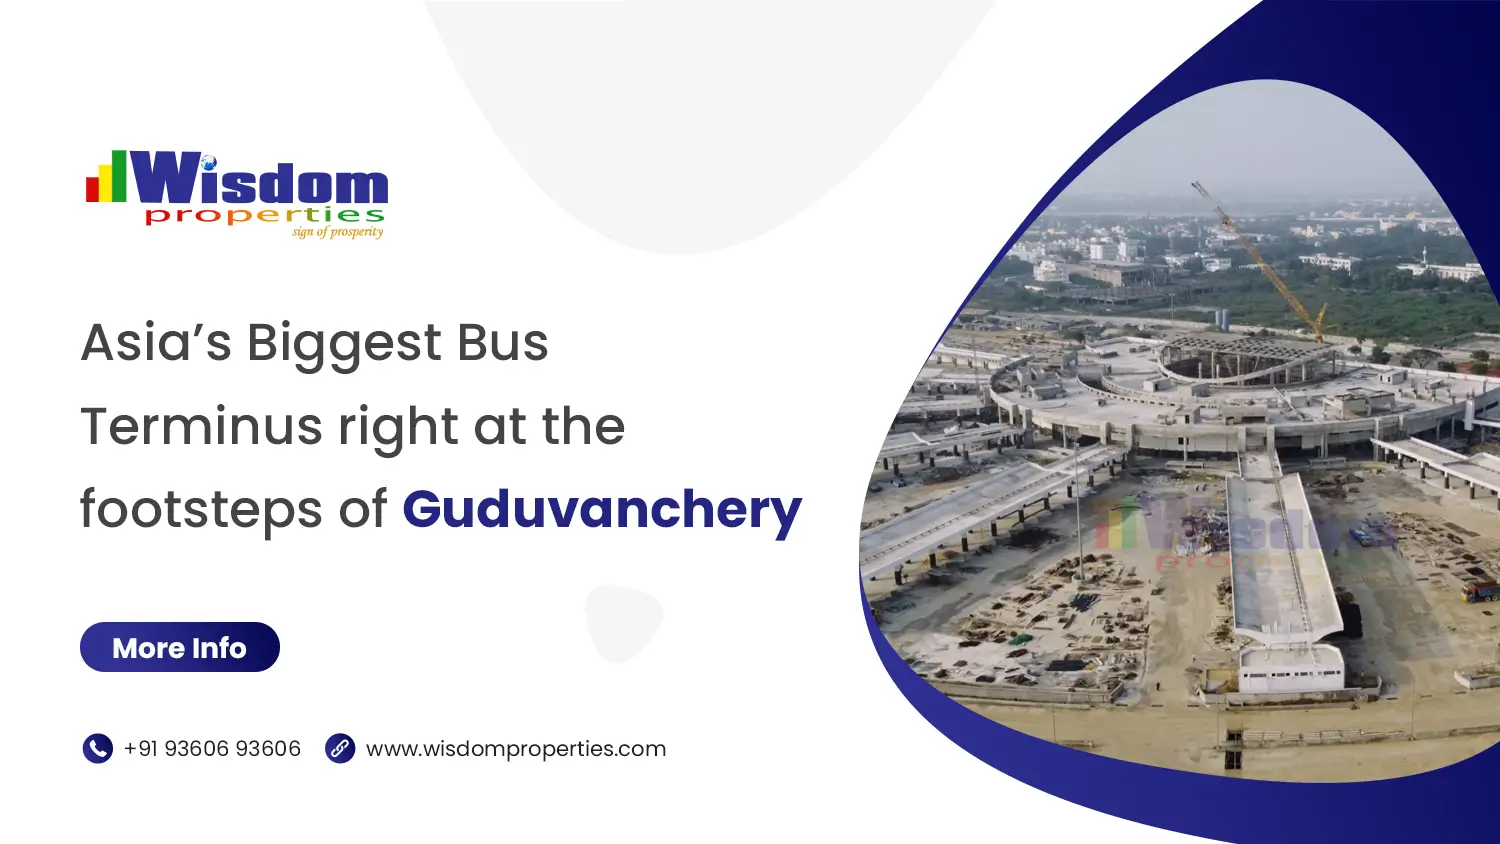 Asia’s Biggest Bus Terminus right at the footsteps of Guduvanchery!